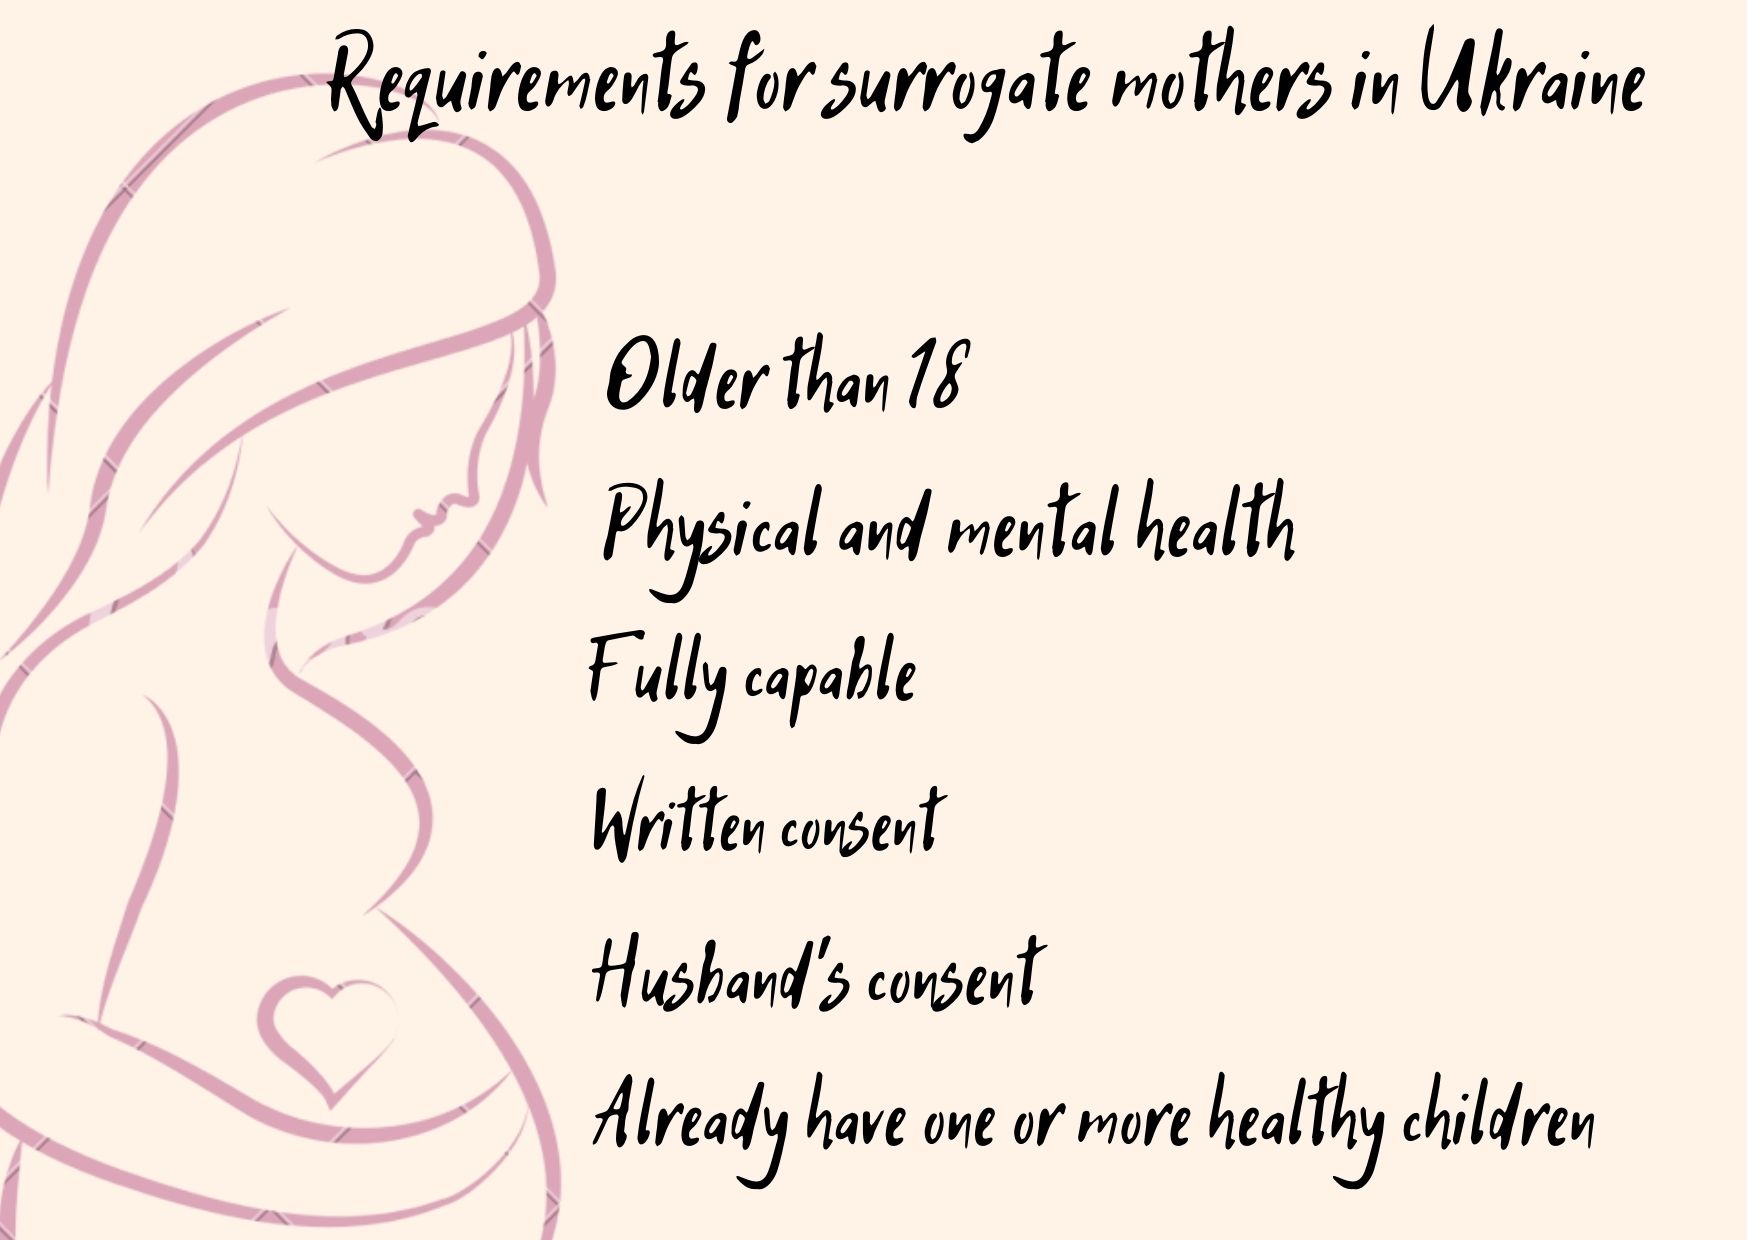 Requirements for surrogate mothers in Ukraine